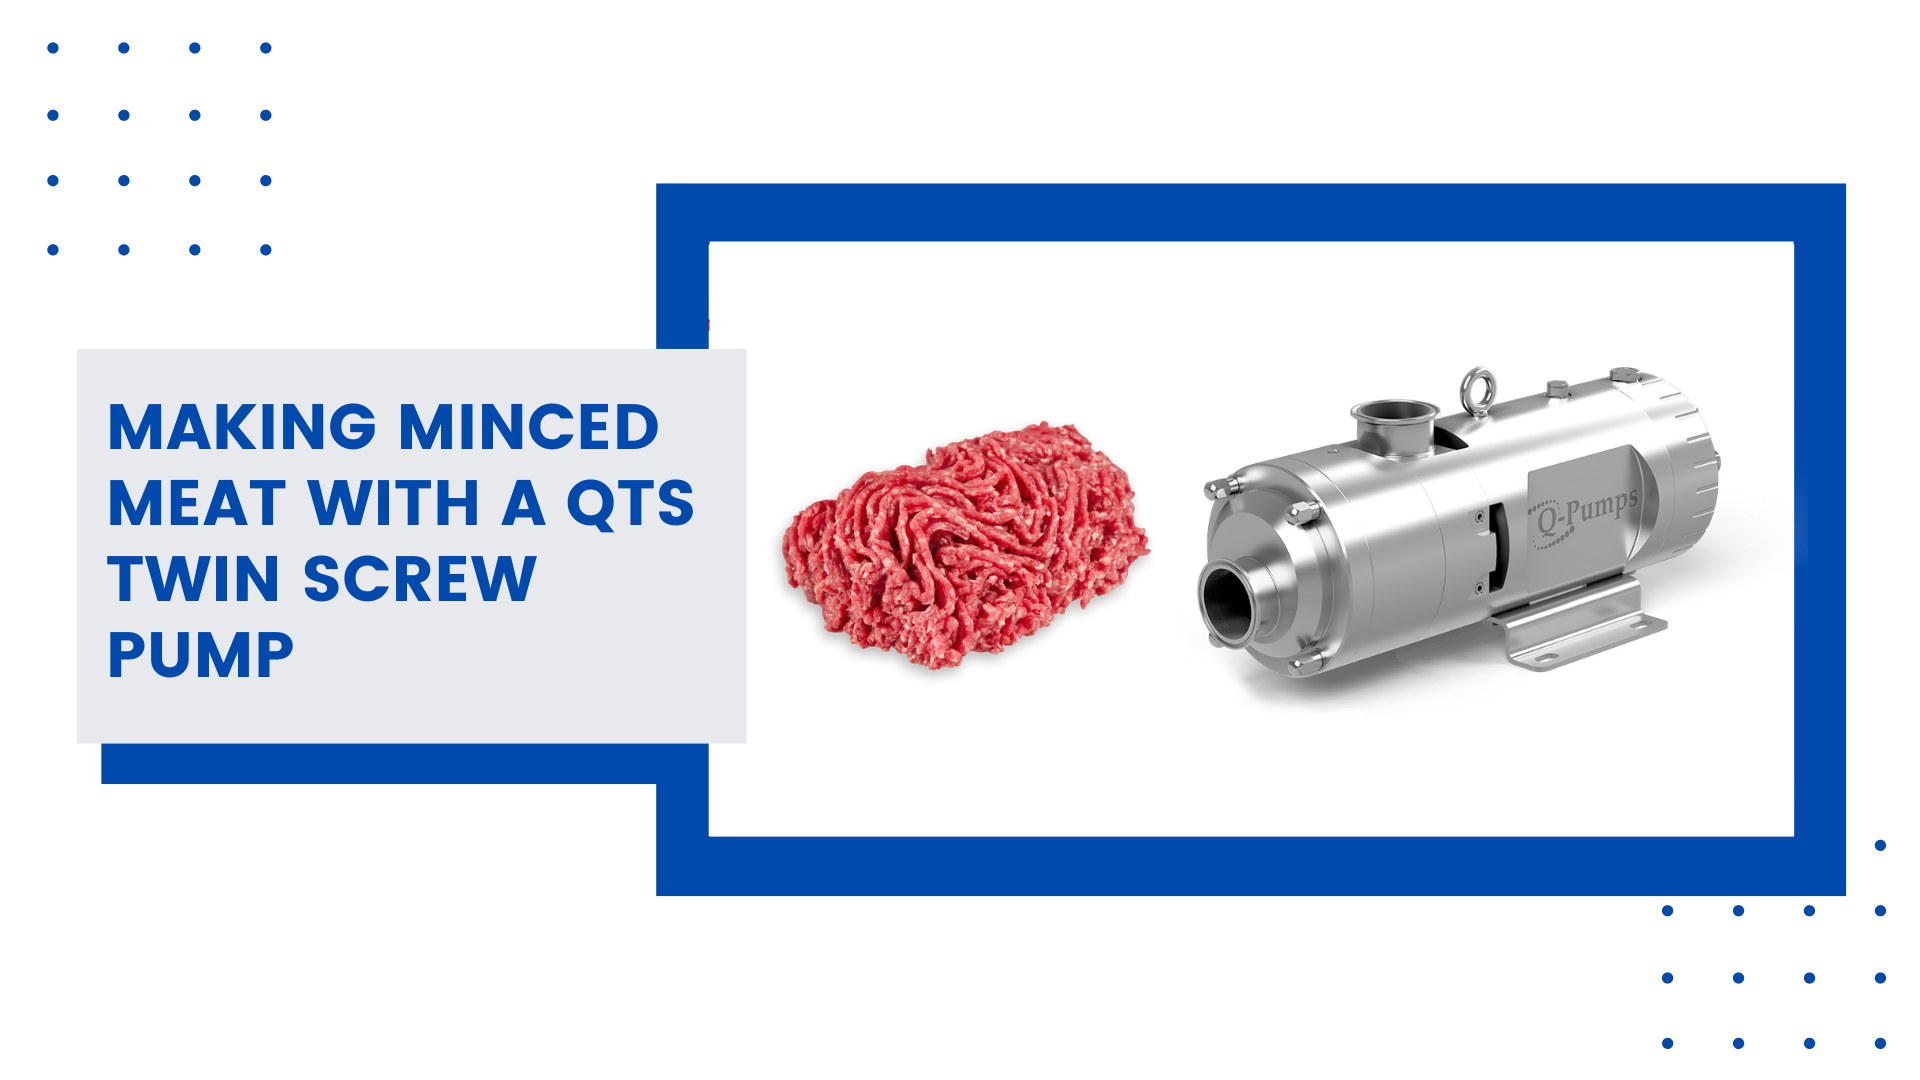 Making Minced Meat With a QTS Twin Screw Pump Youtube Video